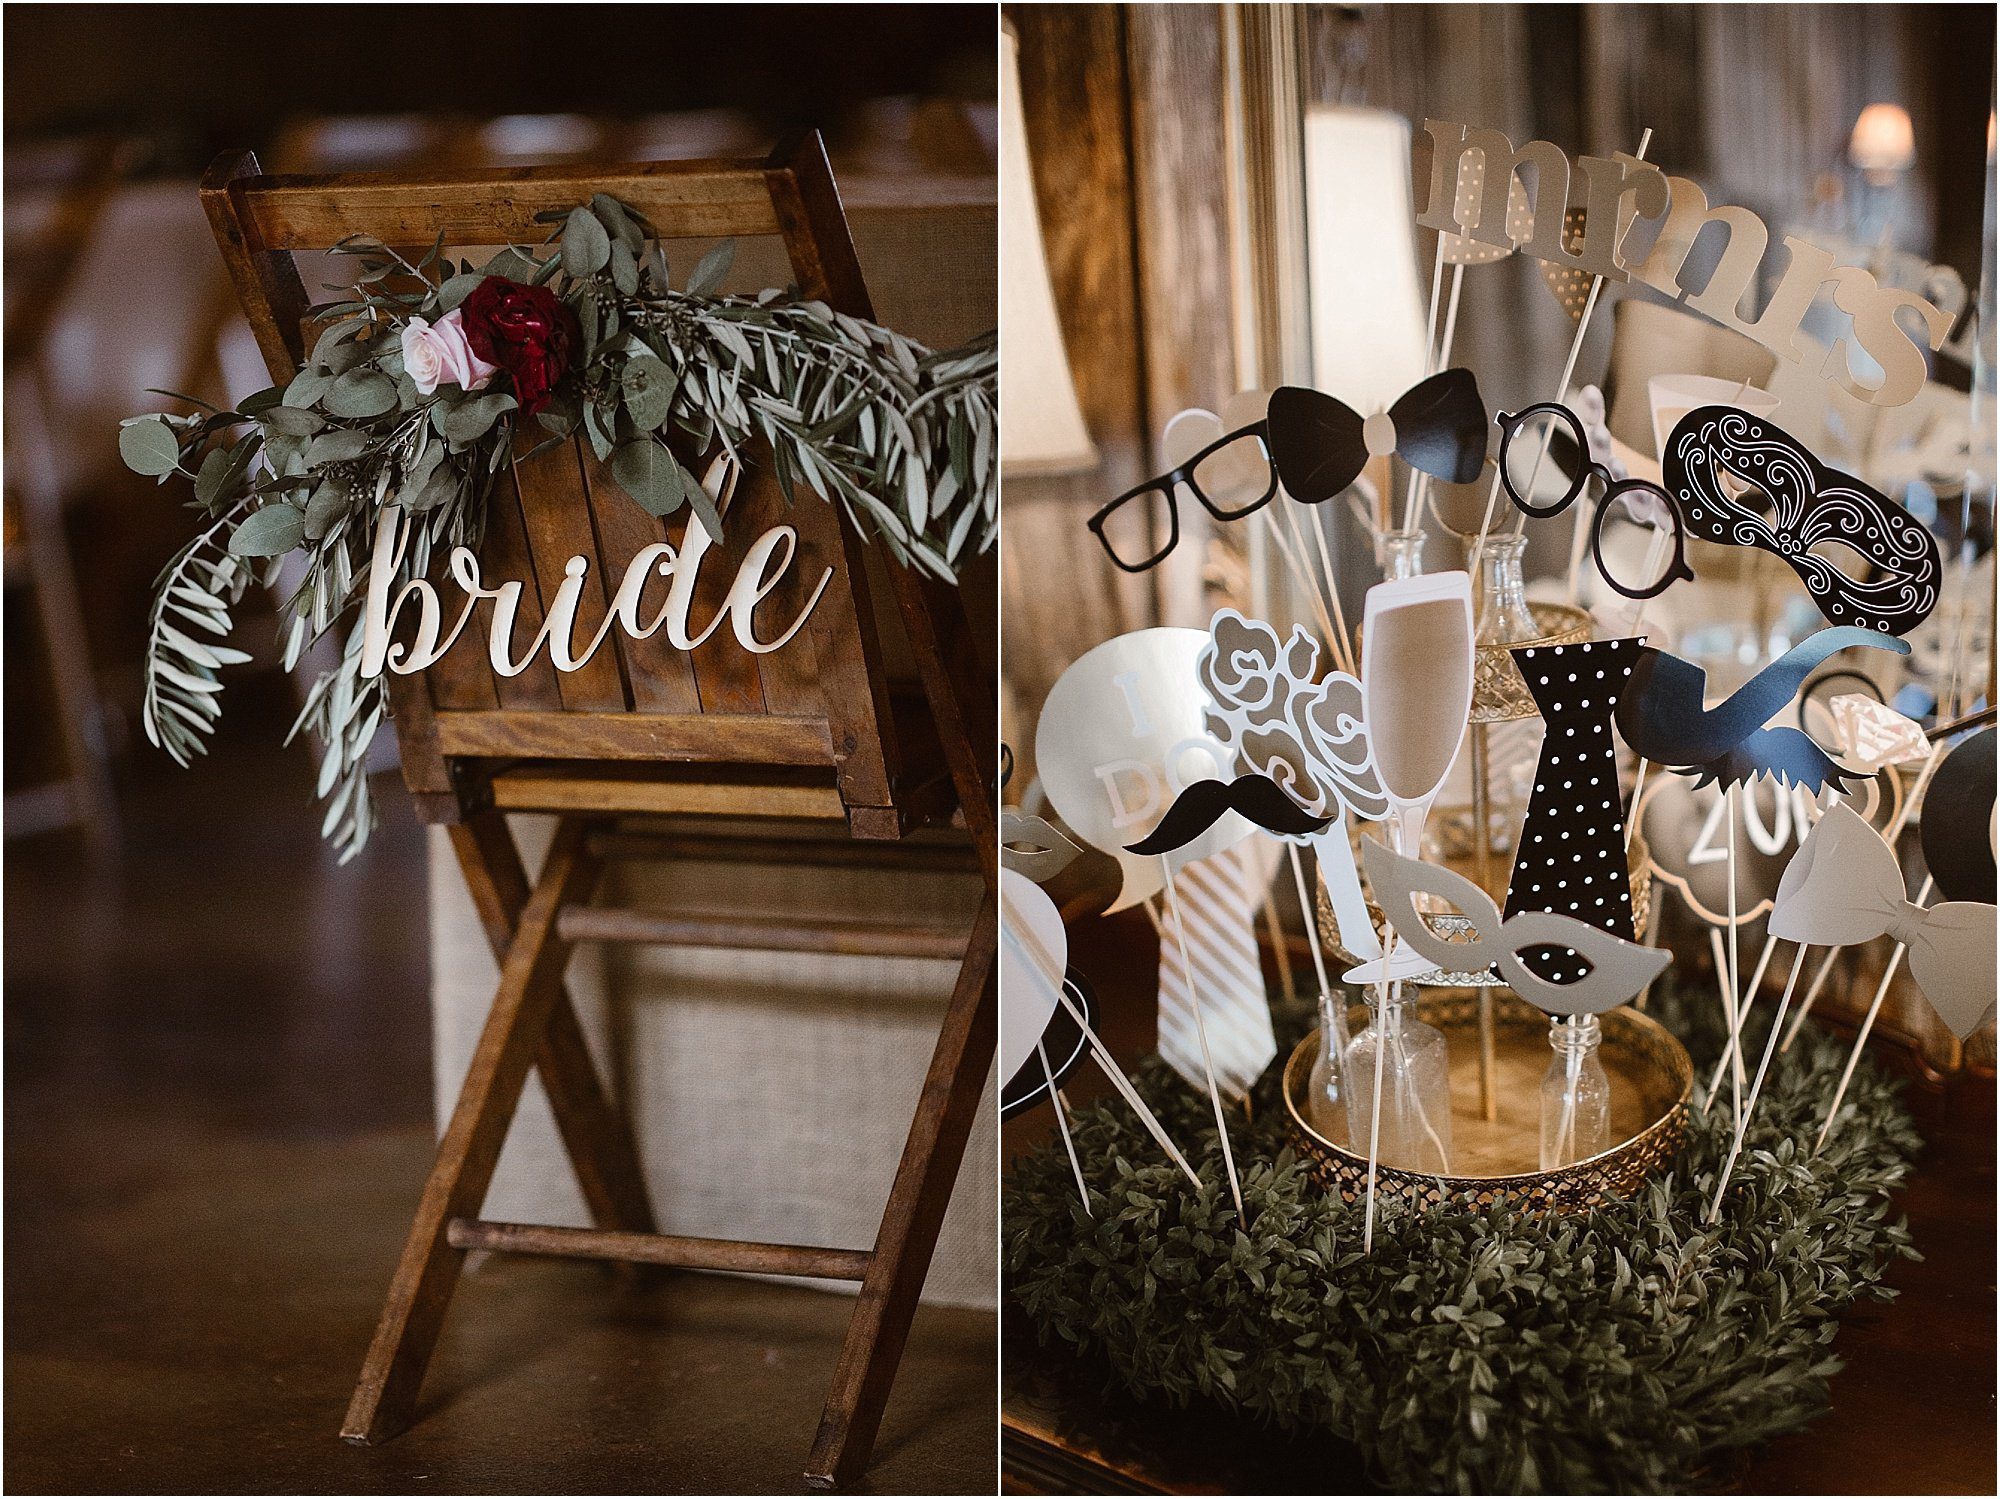 Winter Mountain Wedding at The Barn at Chestnut Springs | Erin Morrison Photography www.erinmorrisonphotography.com